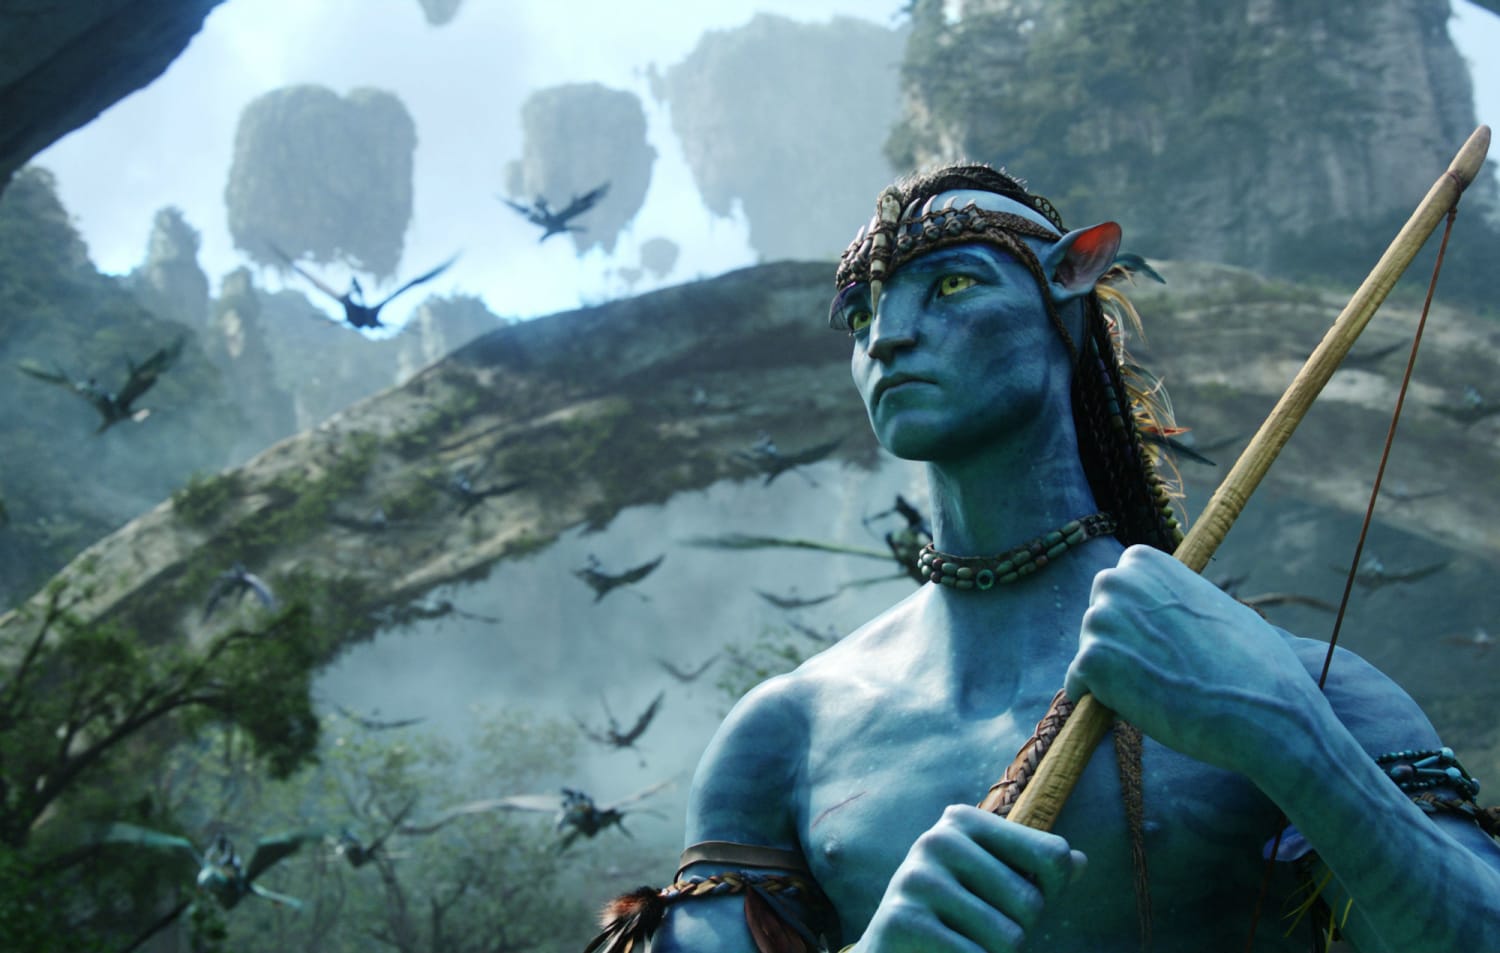 'Avatar: The Way of Water' filming wraps for 2019 with a 'sneak peek'